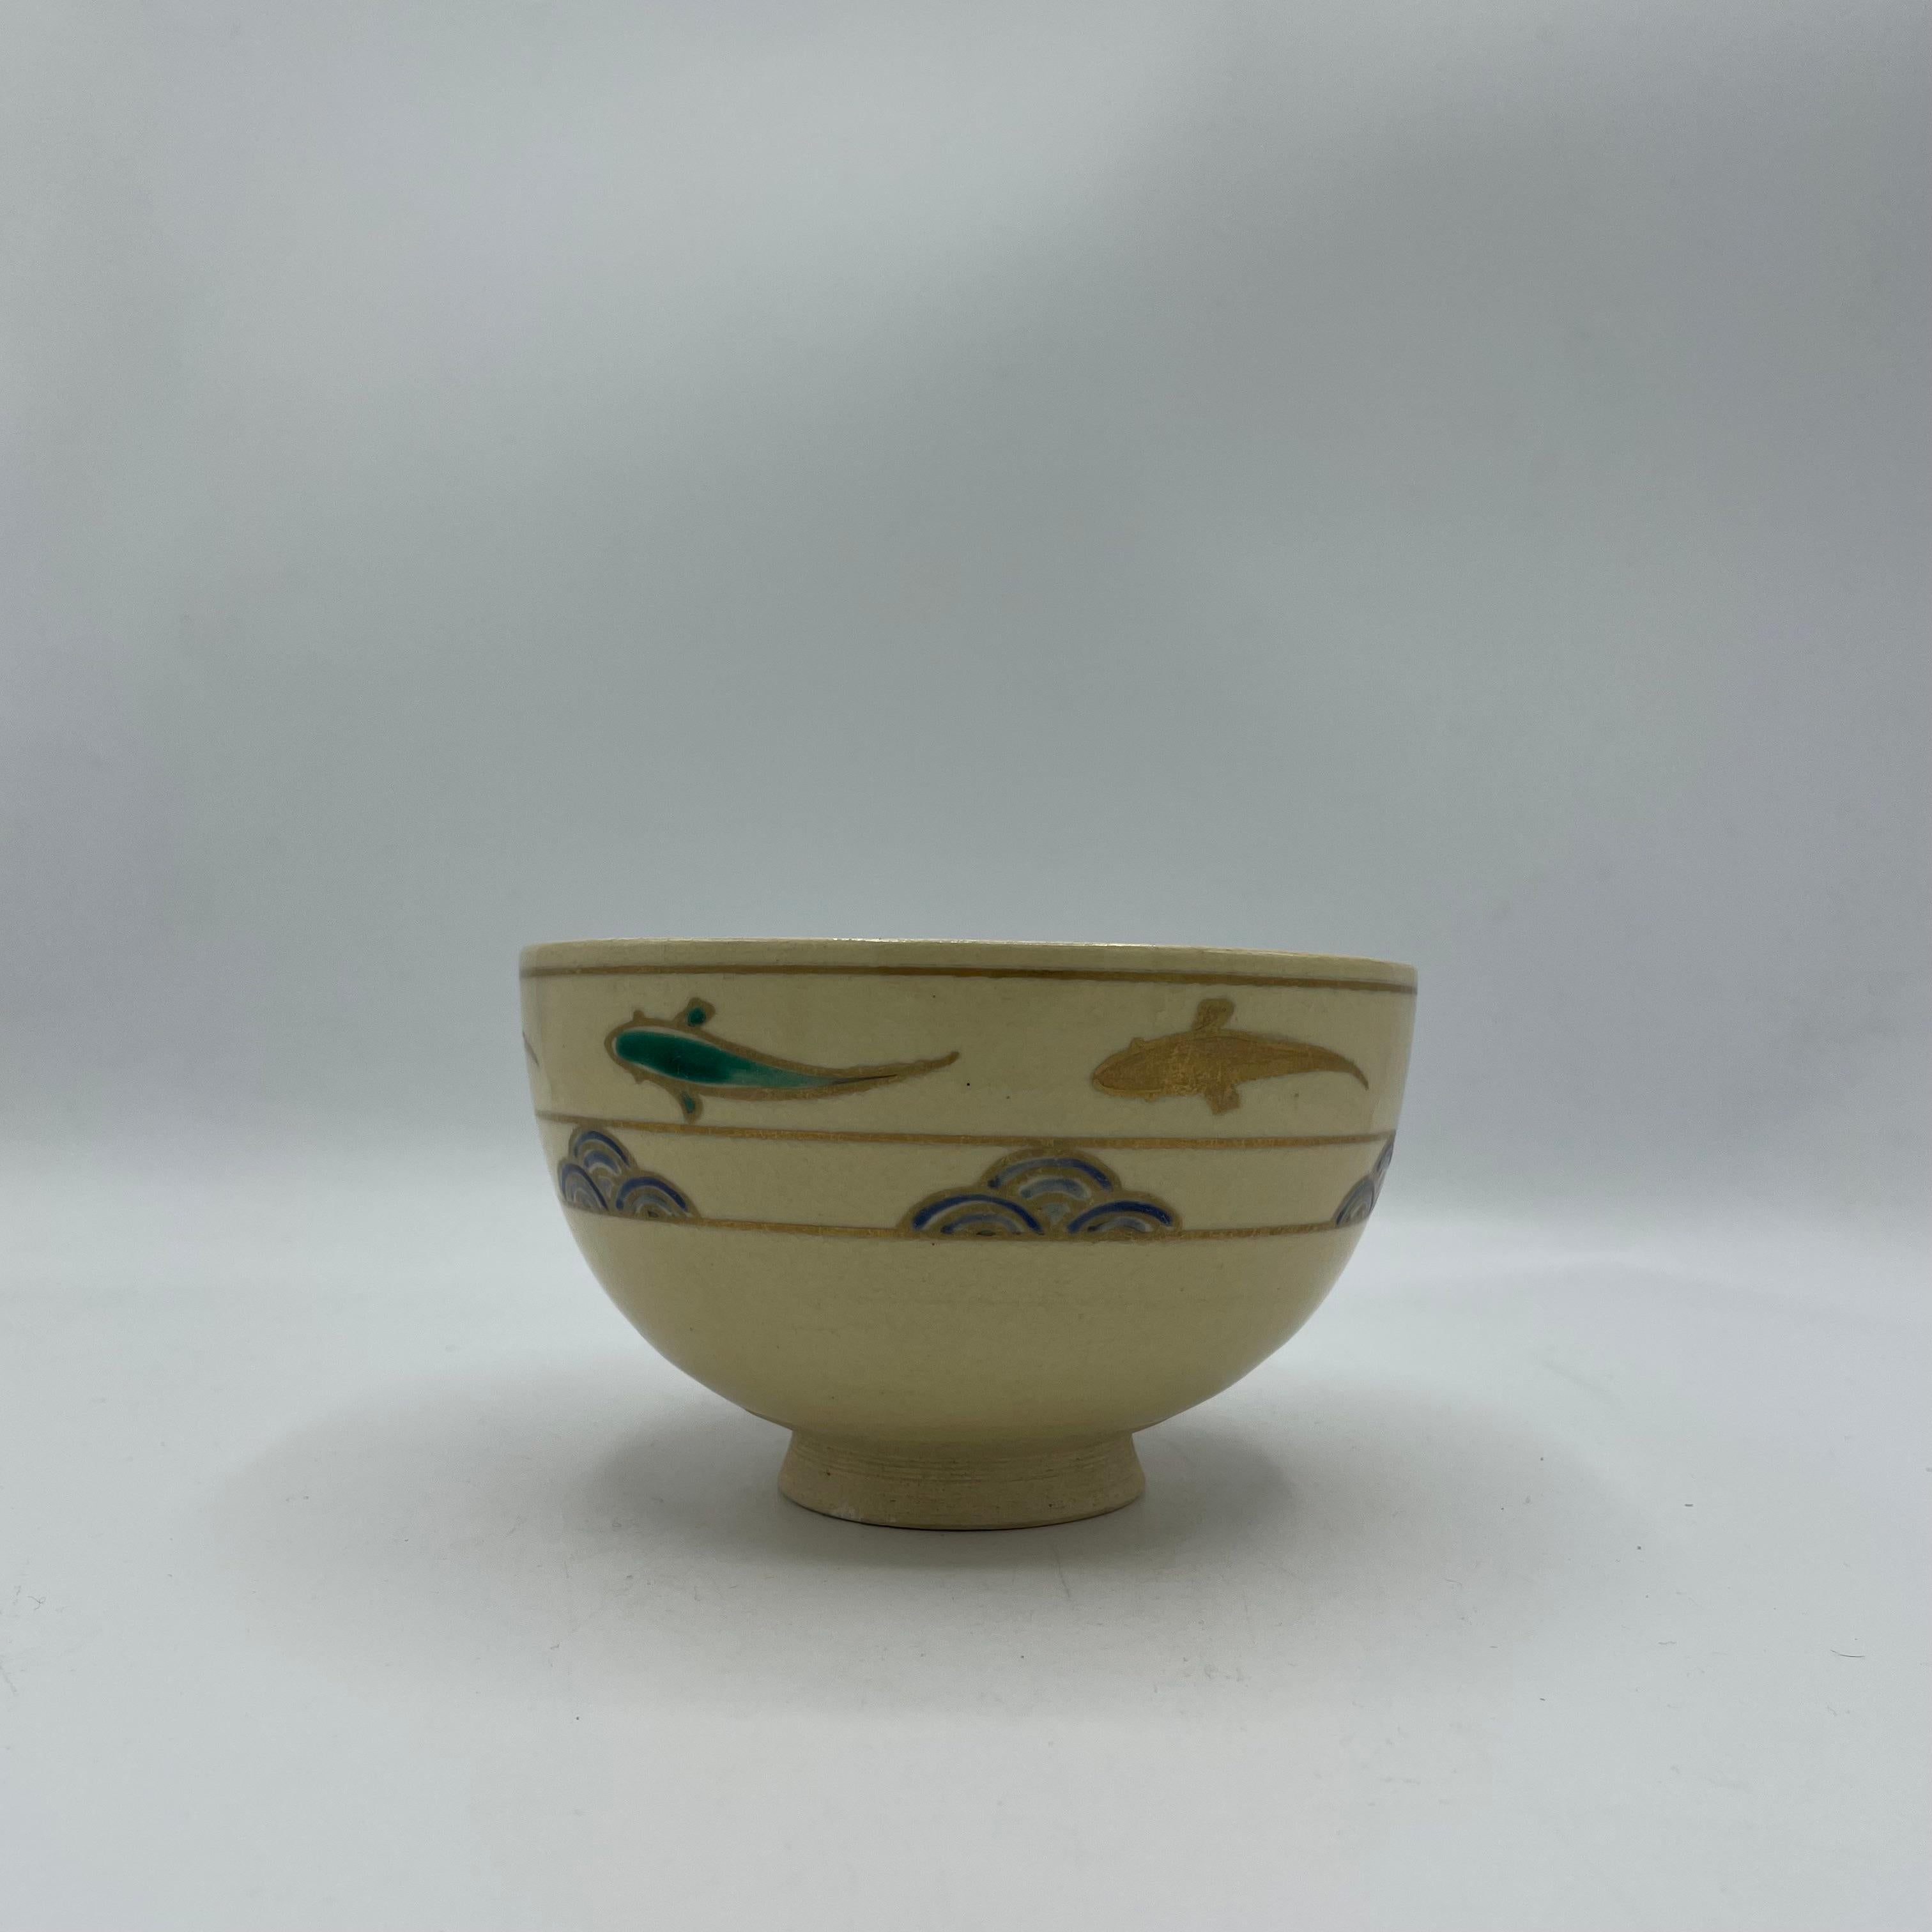 This is a Matcha bowl which we use for tea ceremony and this bowl was made in Japan around 1980s in Showa era.
This bowl is made with Style Kyo-Kiyomizu.
Kyo-kiyomizu style is made in Kyoto prefecture.

Kiyomizu ware is a type of Kyō ware